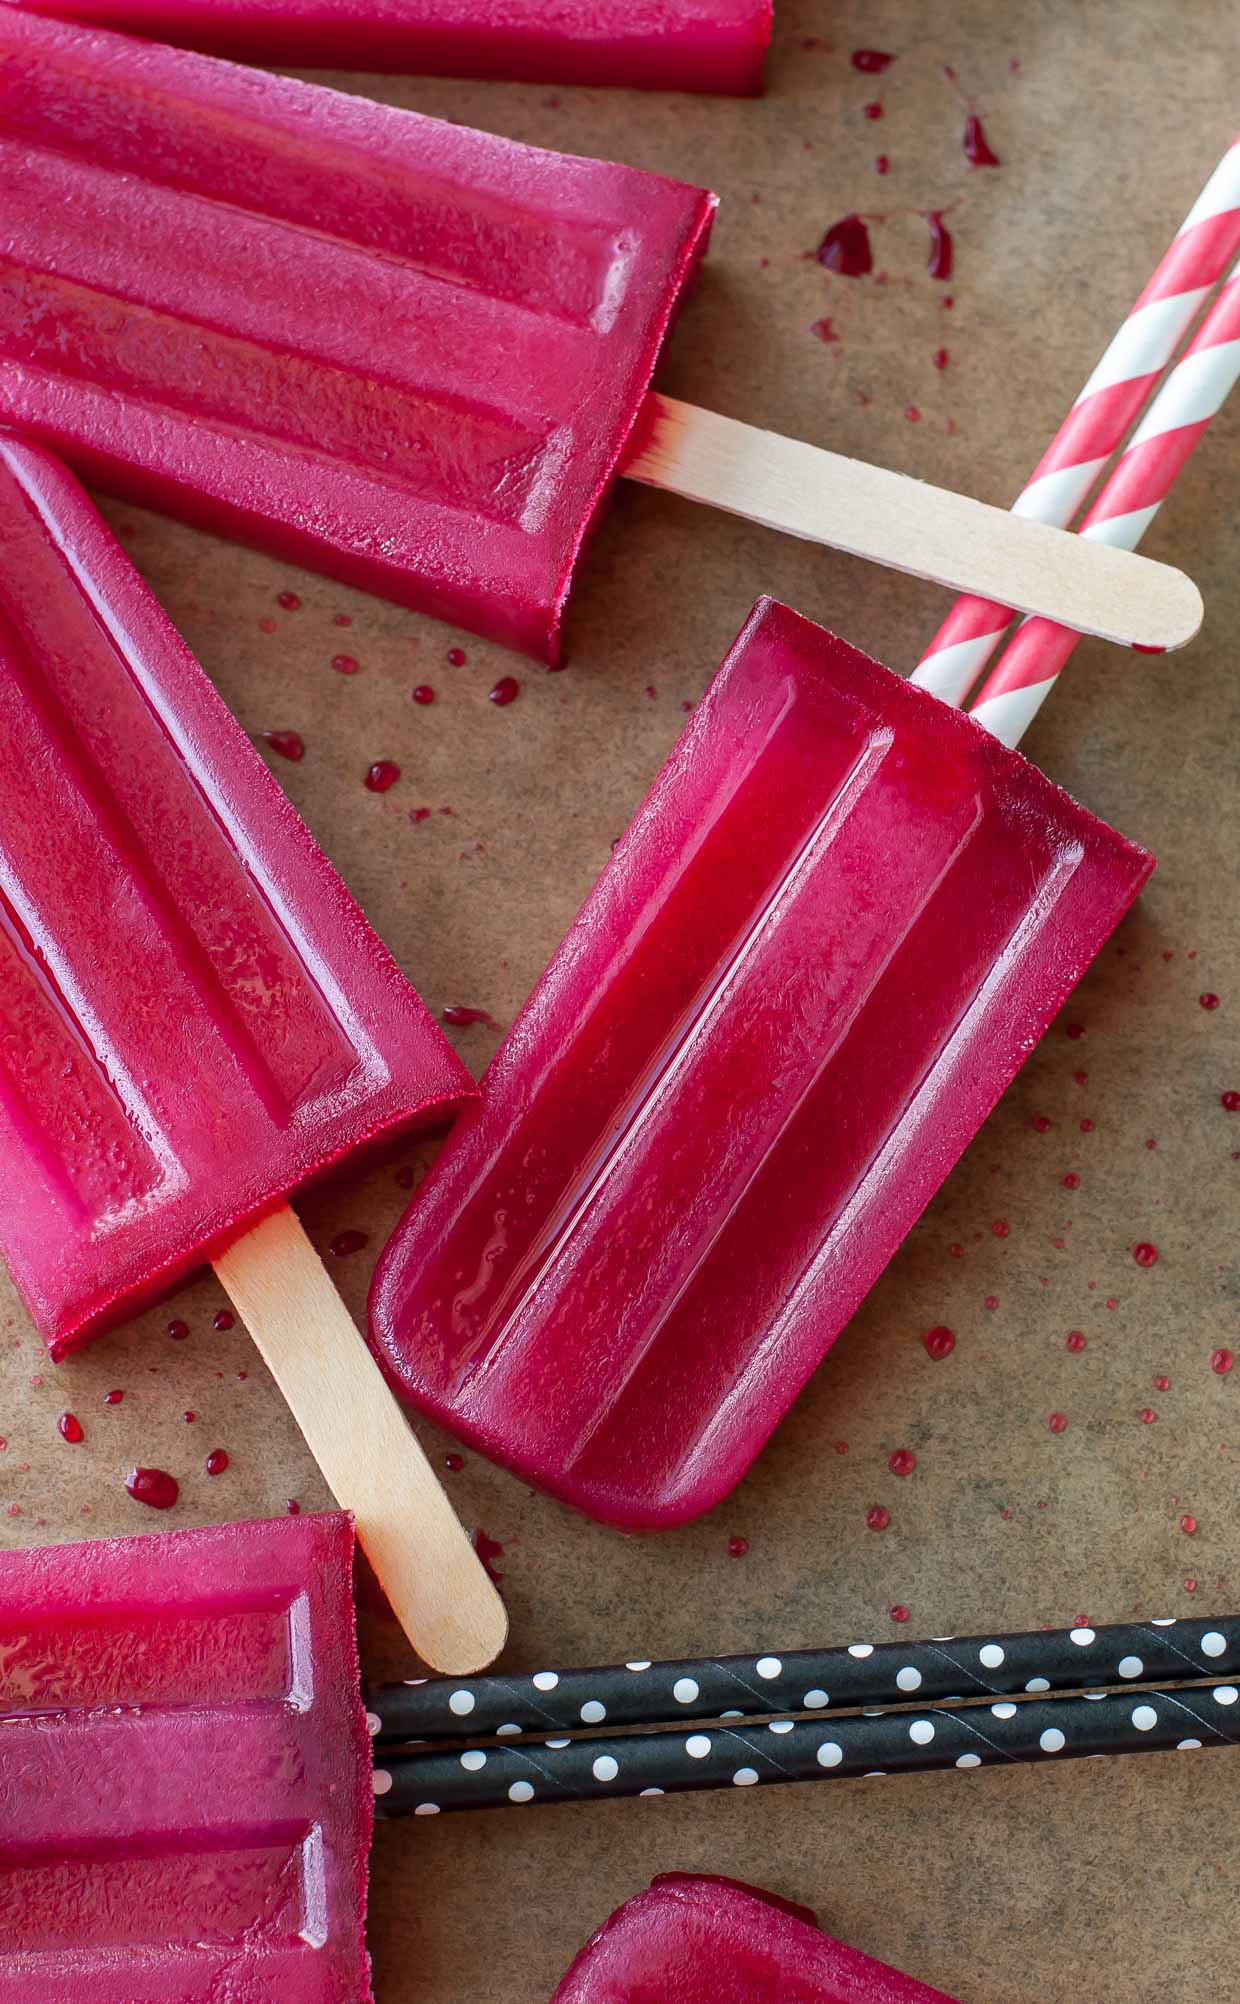 Green Tea Hibiscus Ice Pops - photo courtesy of Jenn Laughlin, Peas and Crayons